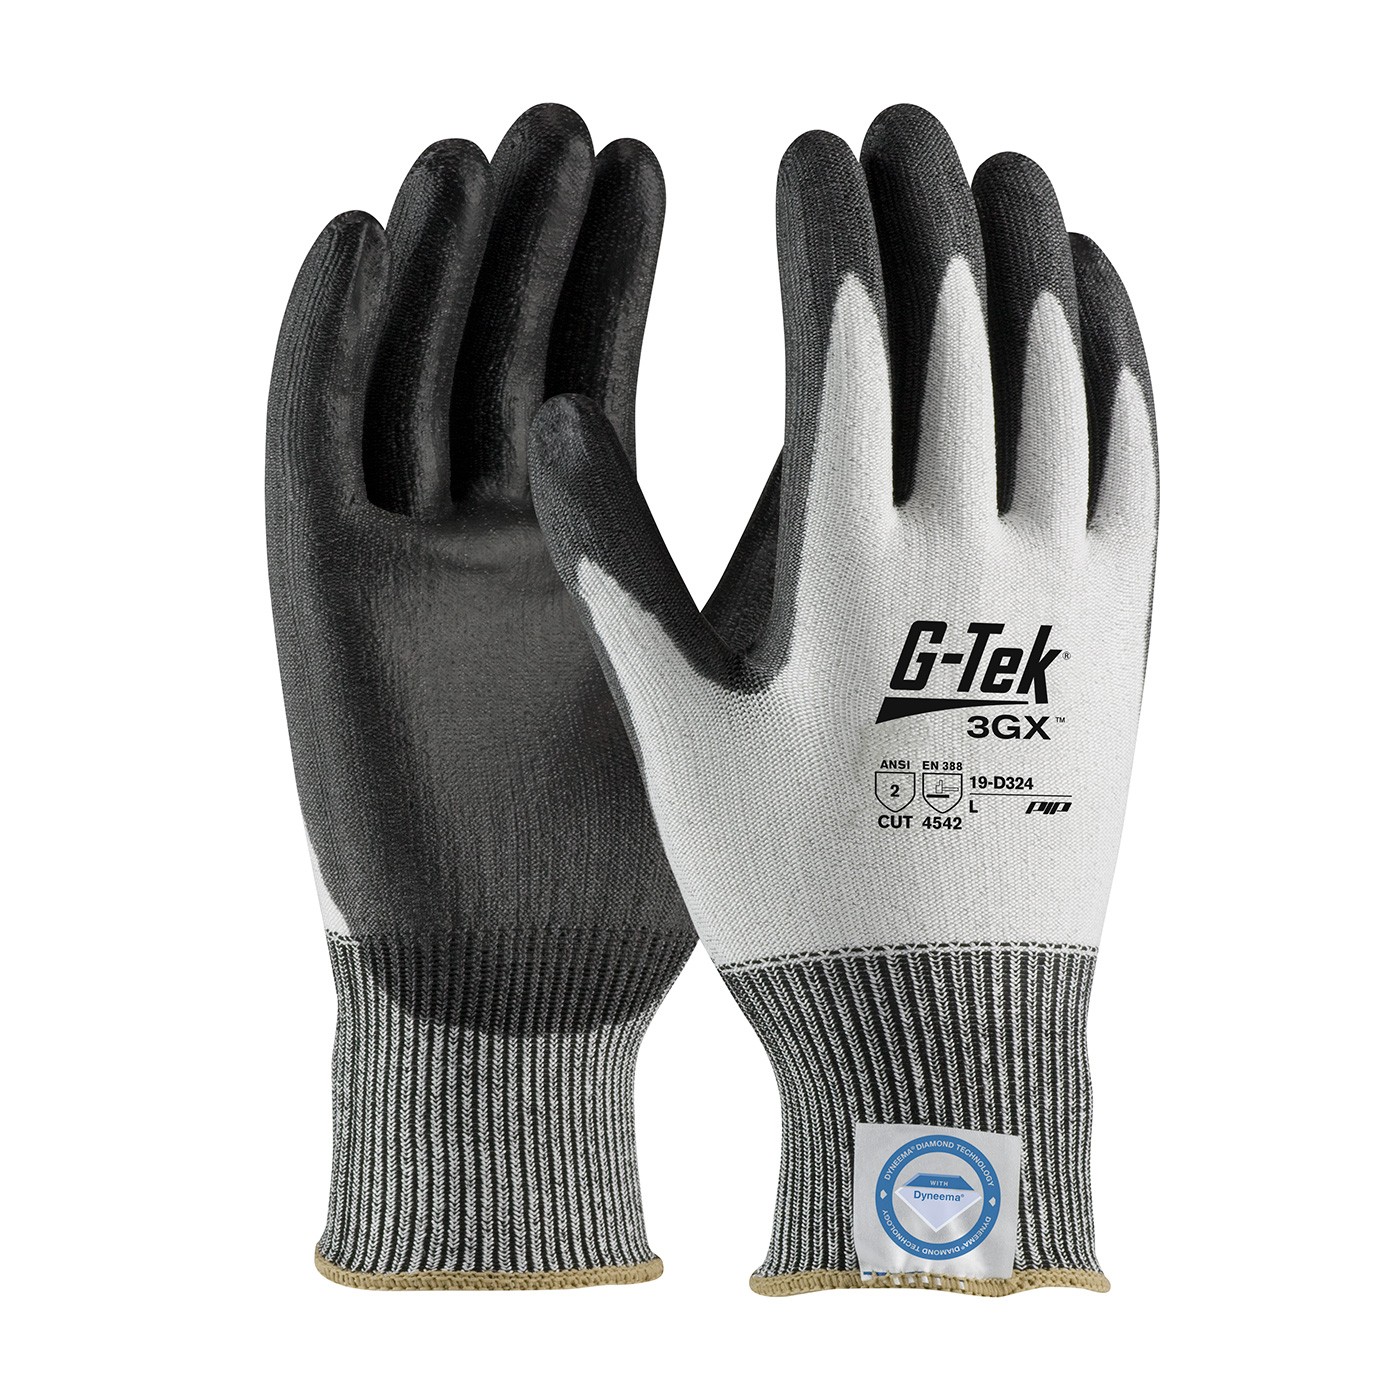 G-Tek® 3GX® Seamless Knit Dyneema® Diamond Blended Glove with Polyurethane Coated Smooth Grip on Palm & Fingers  (#19-D324)